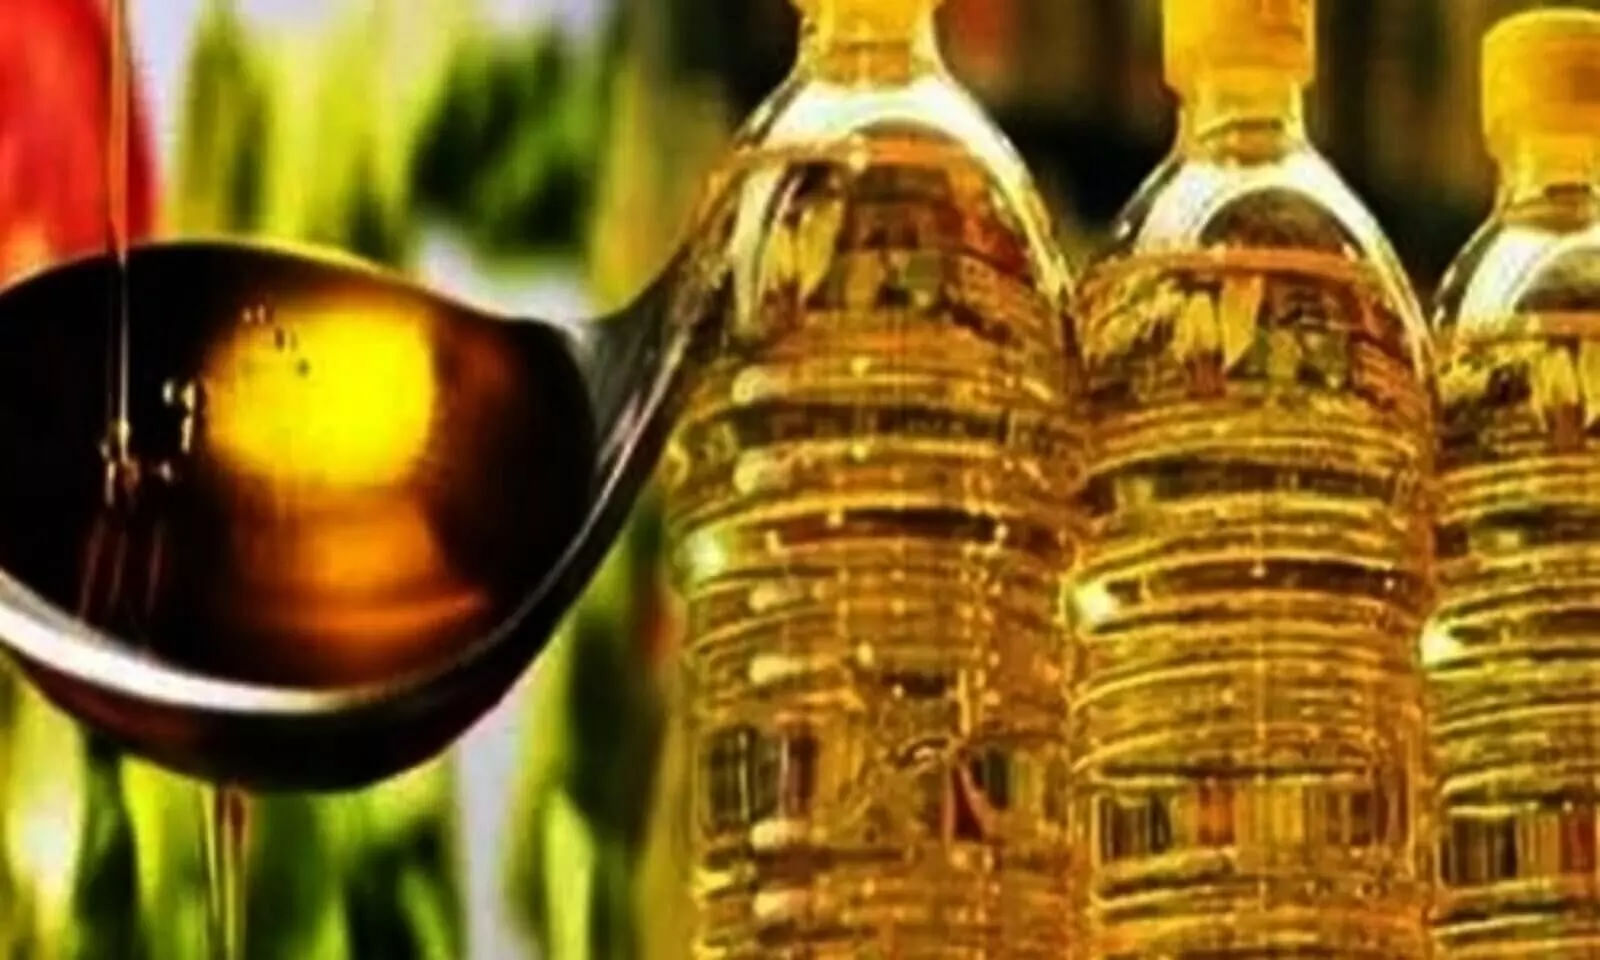 Domestic oil prices on decline, mustard oil outlier